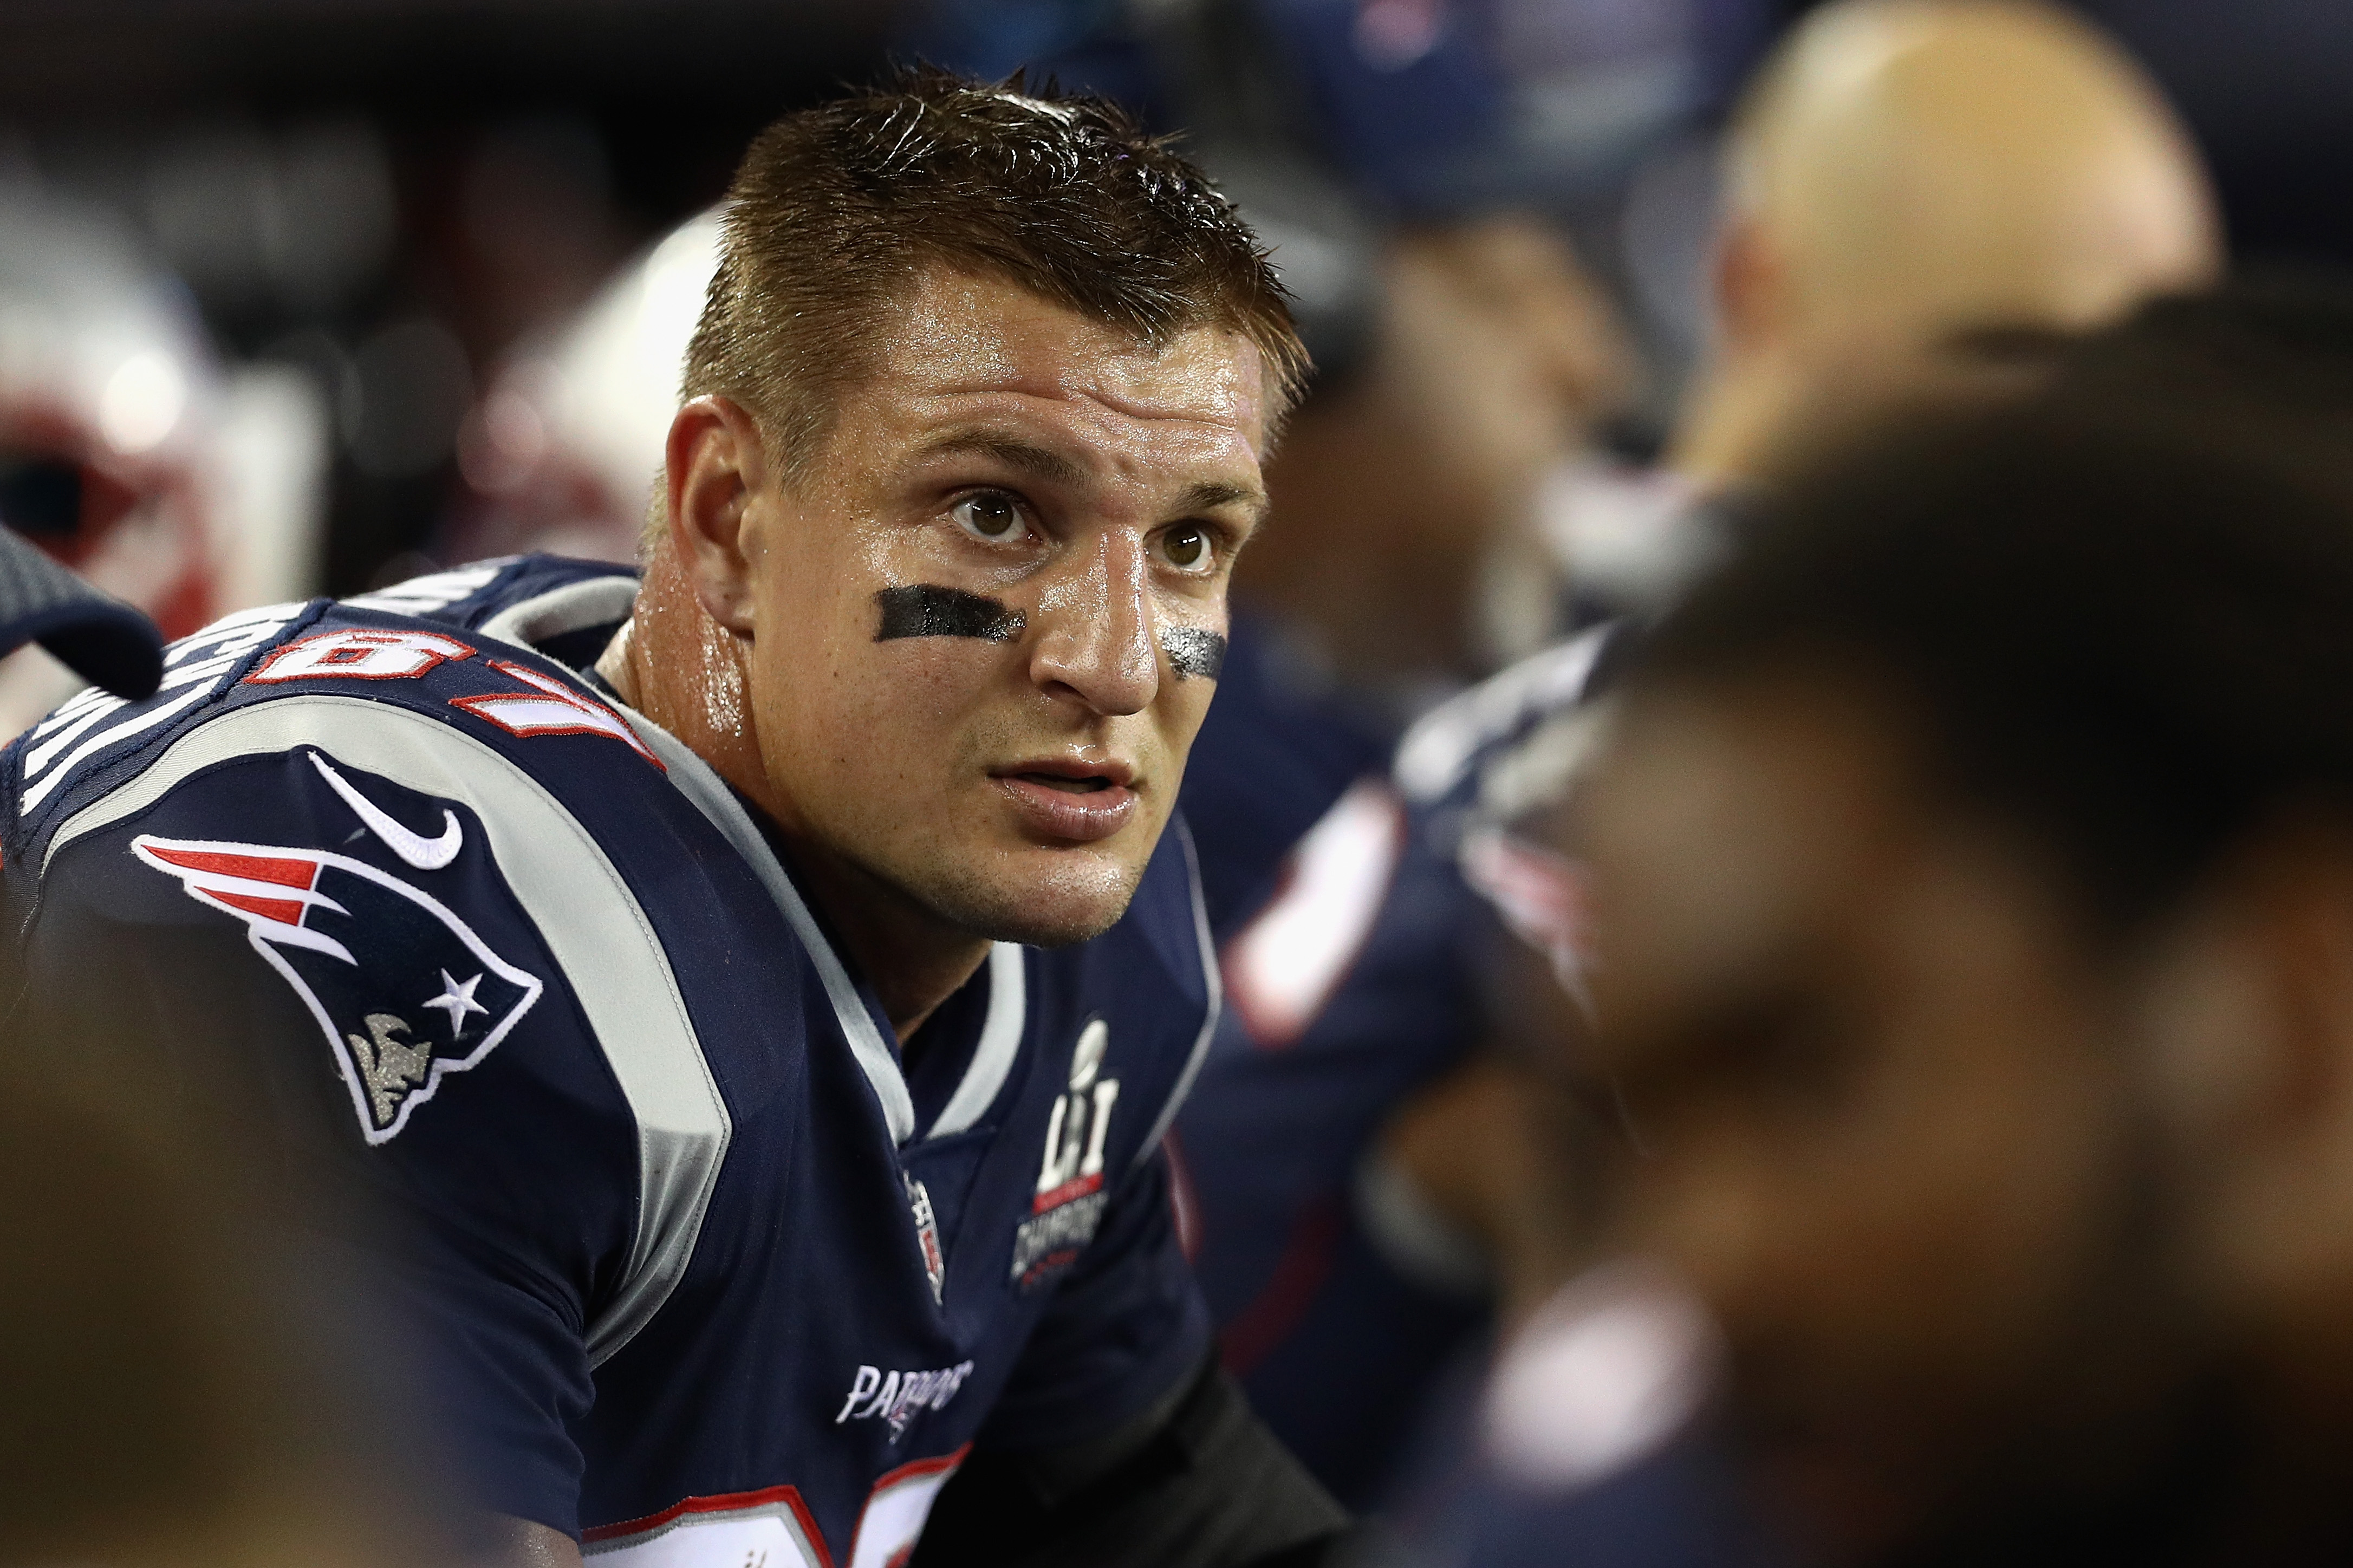 WWE Reportedly Interested In Offering A Similar Style Deal To Rob Gronkowski That They Did To Ronda Rousey